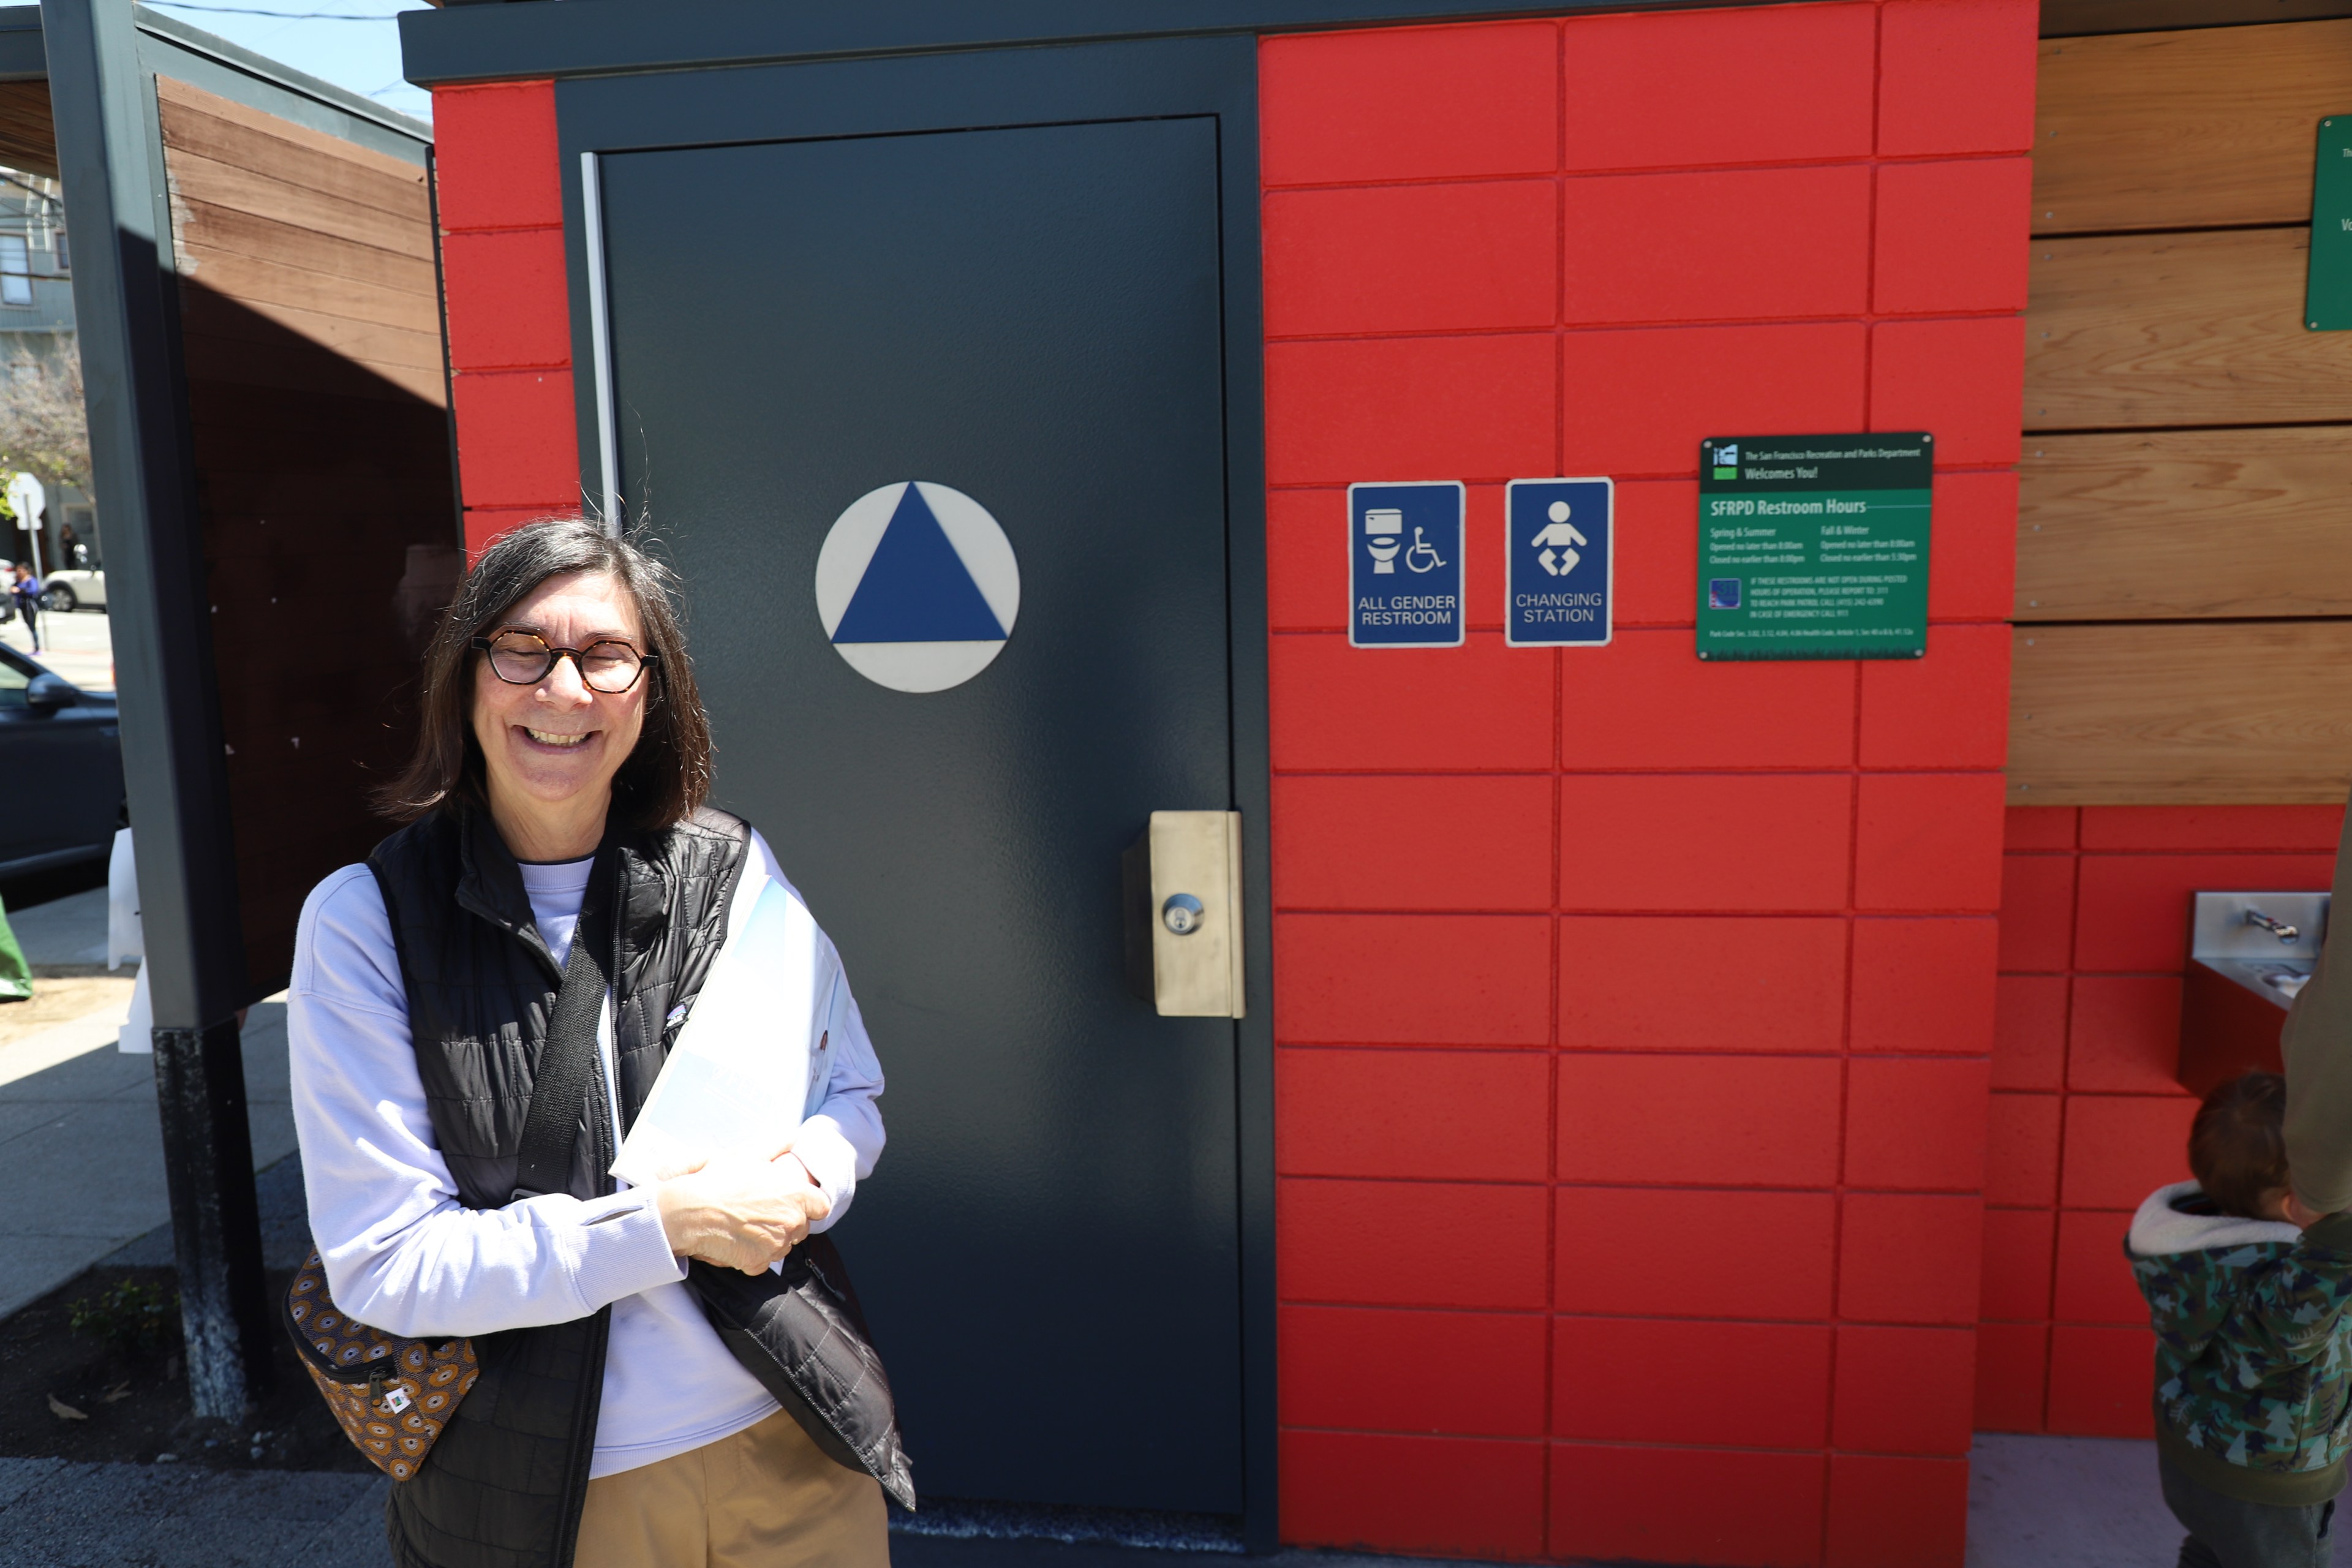 A woman stands in front of a public restroom on a sunny day.